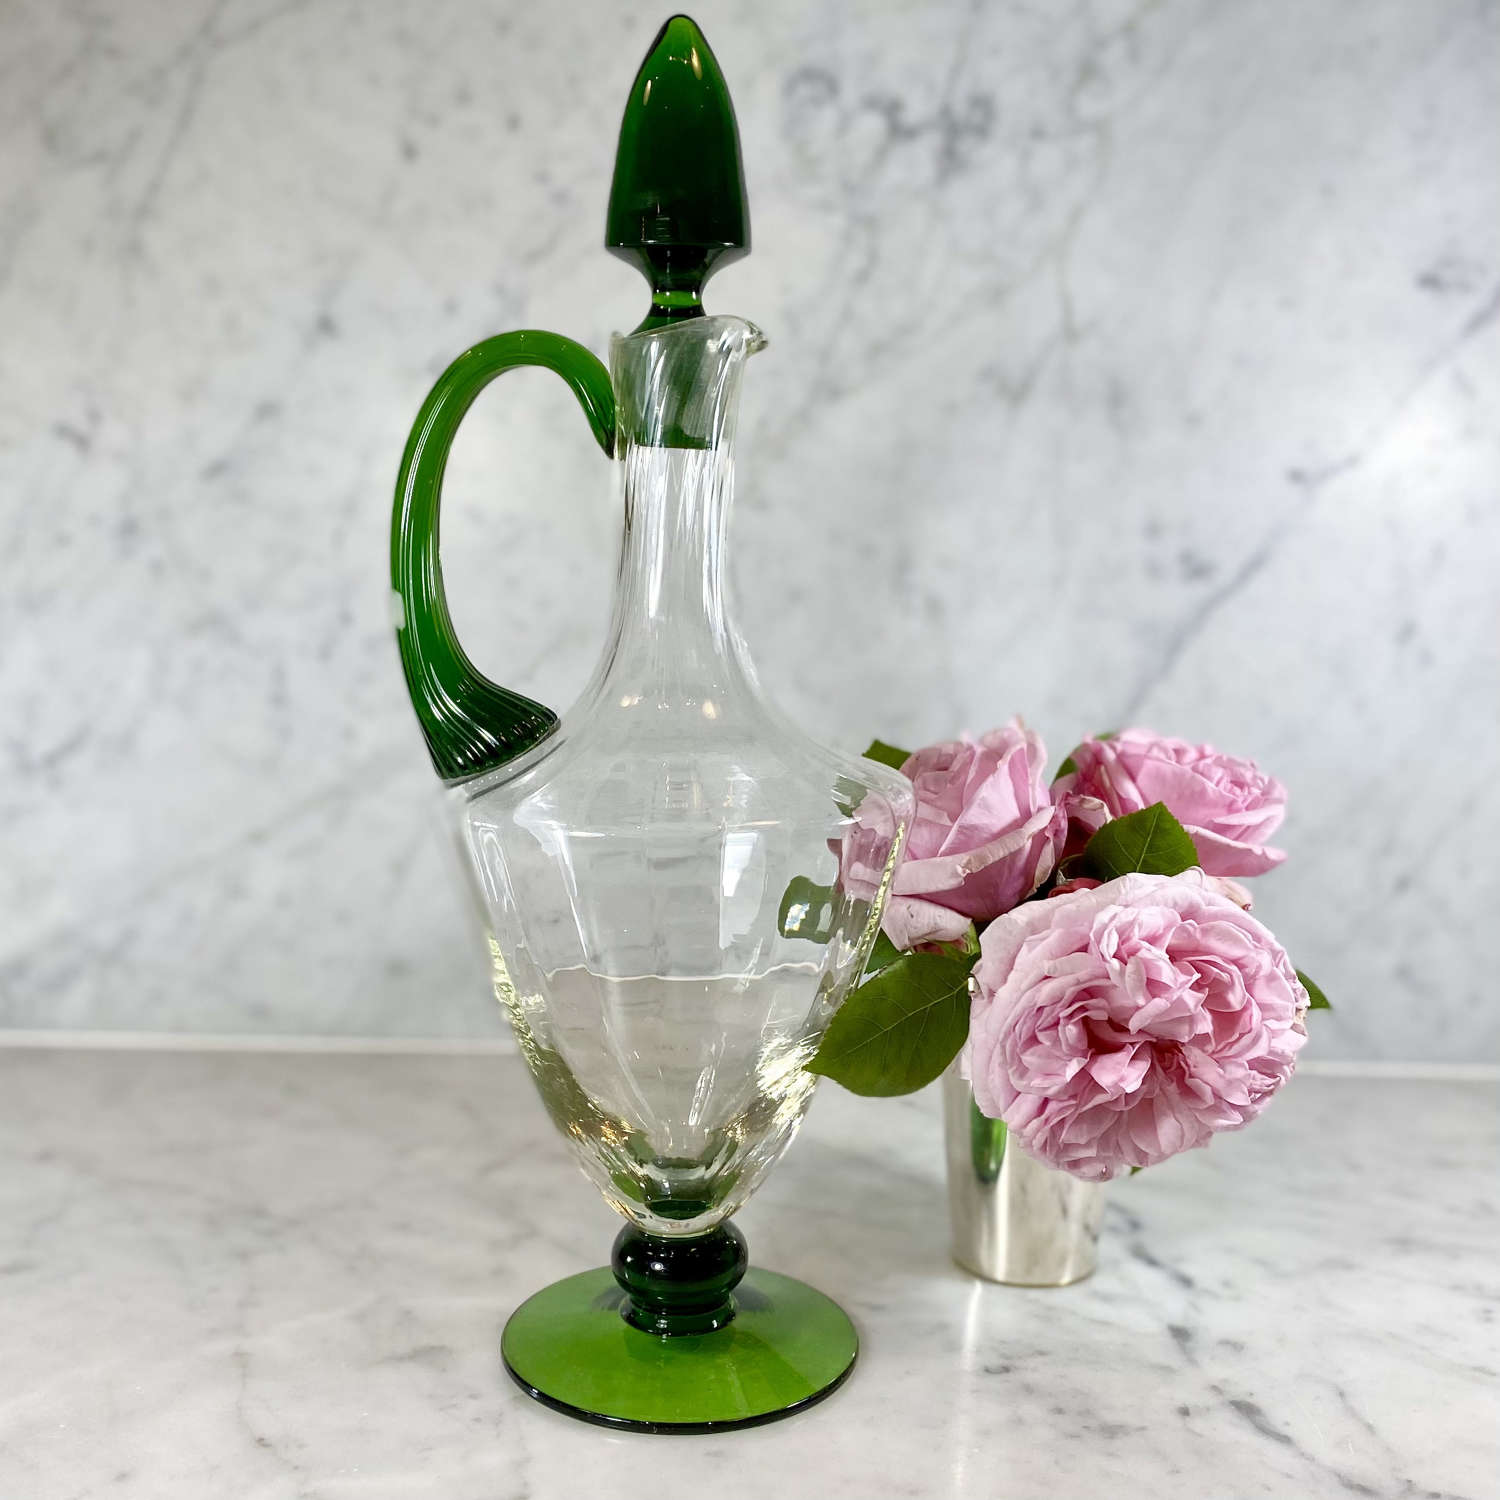 Art Deco optical blown glass decanter and stopper